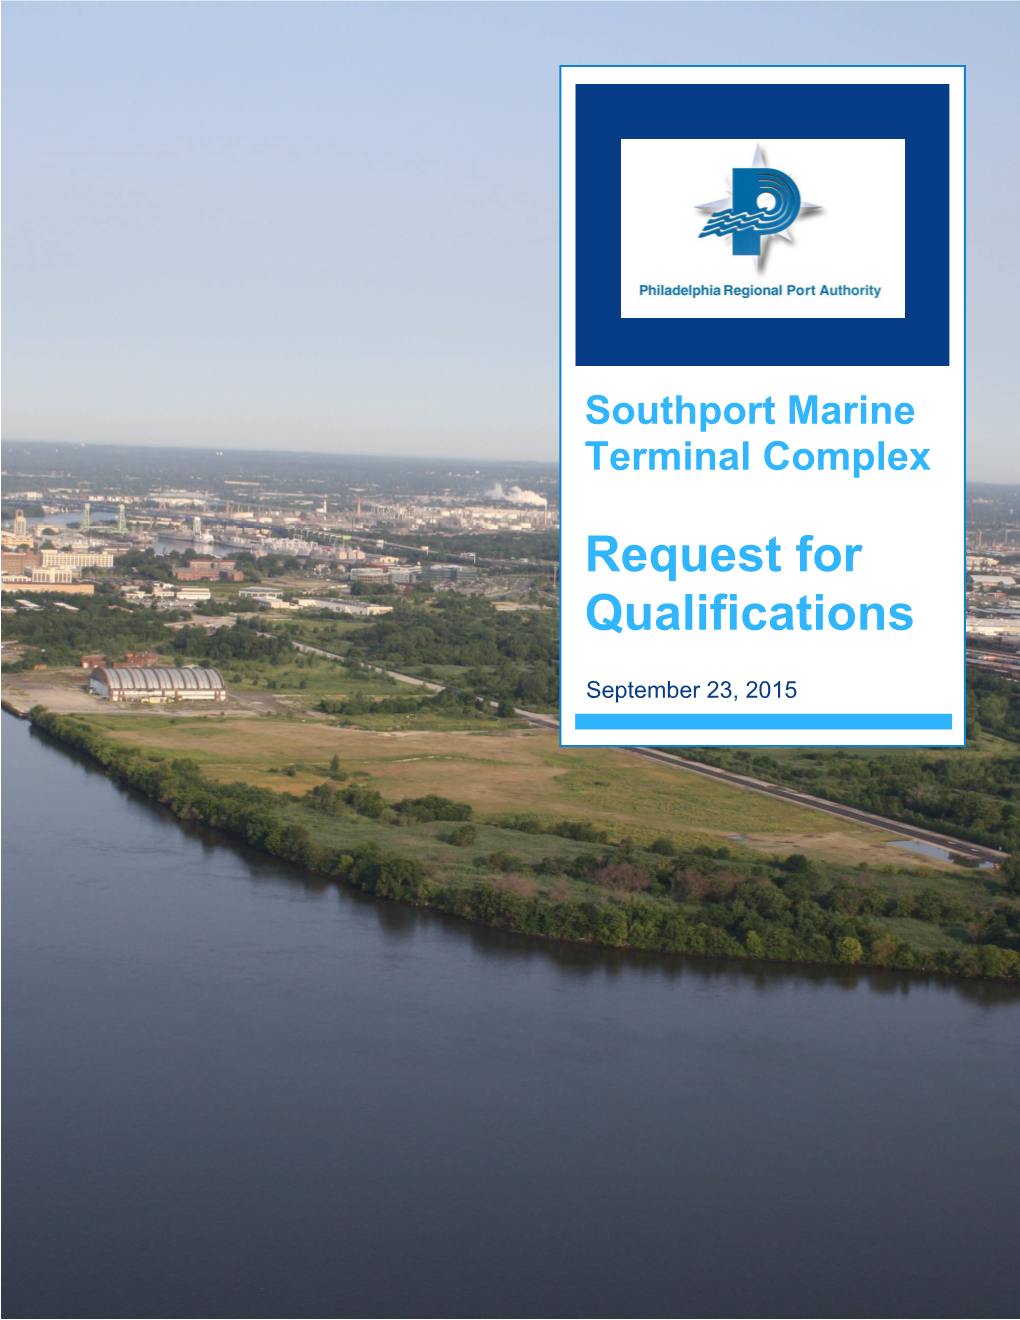 Southport Marine Terminal Complex Request for Qualifications